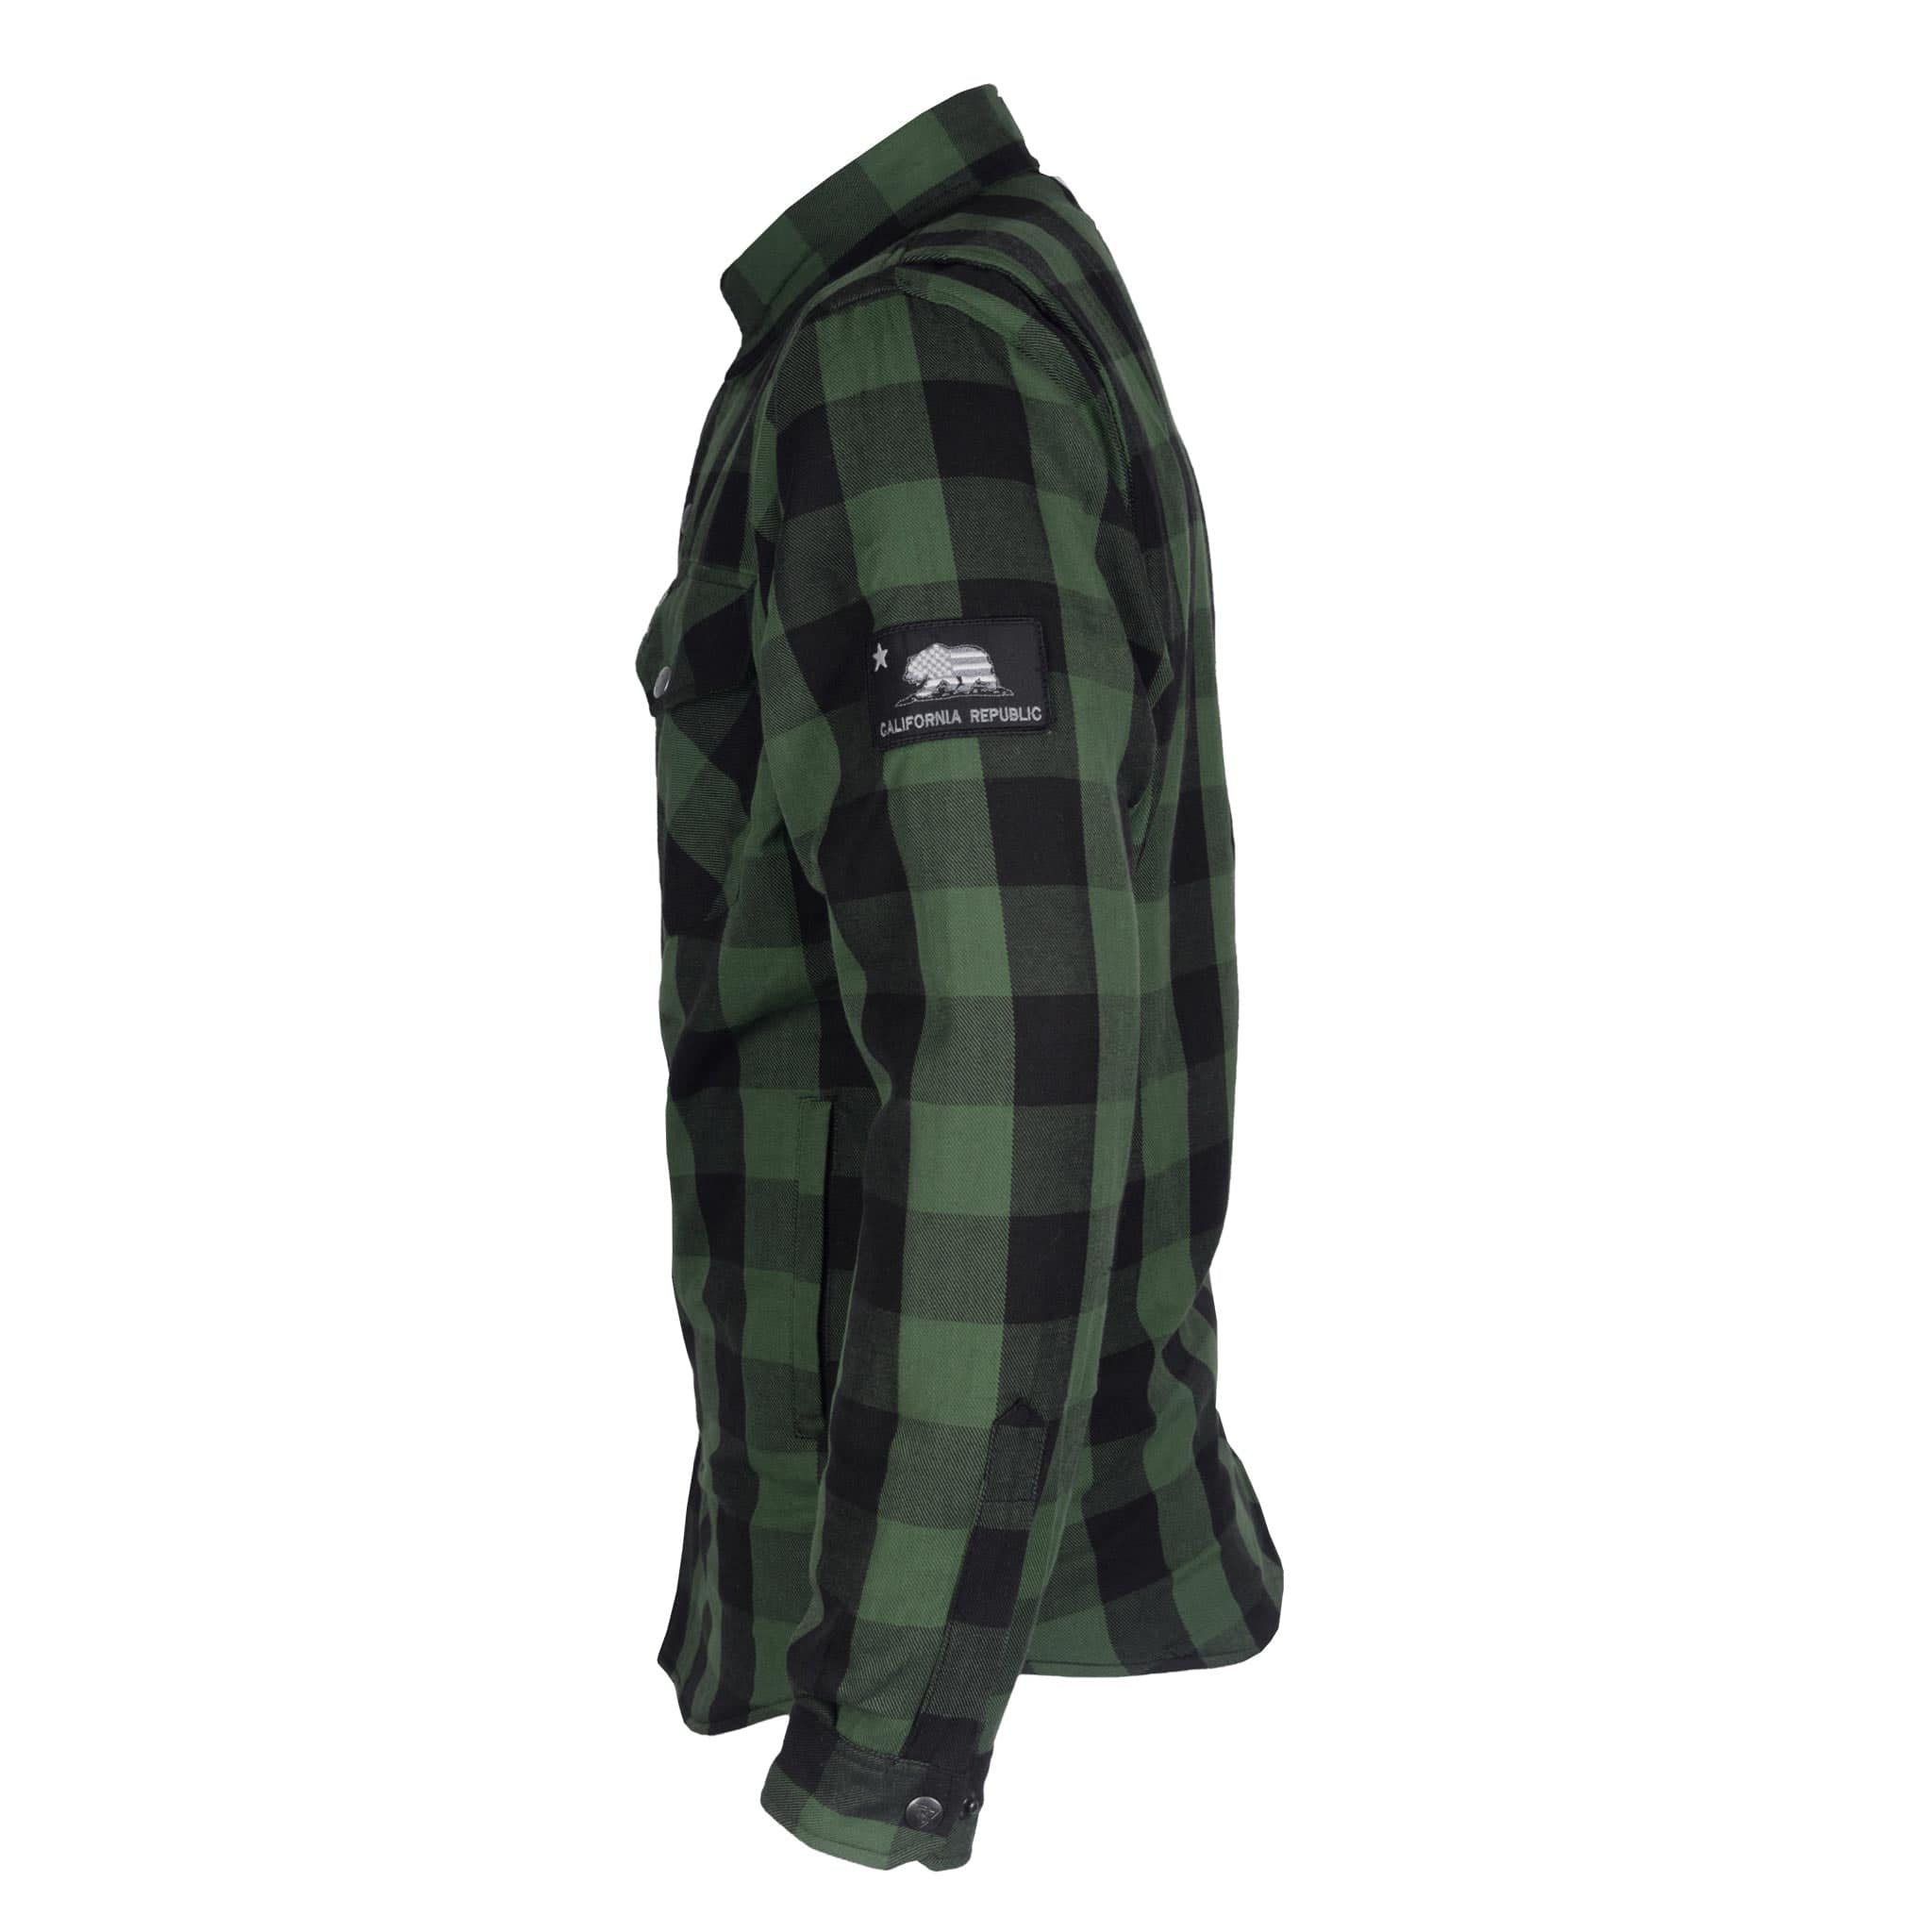 Protective Flannel Shirt "Forest Fury" - Green and Black with Pads